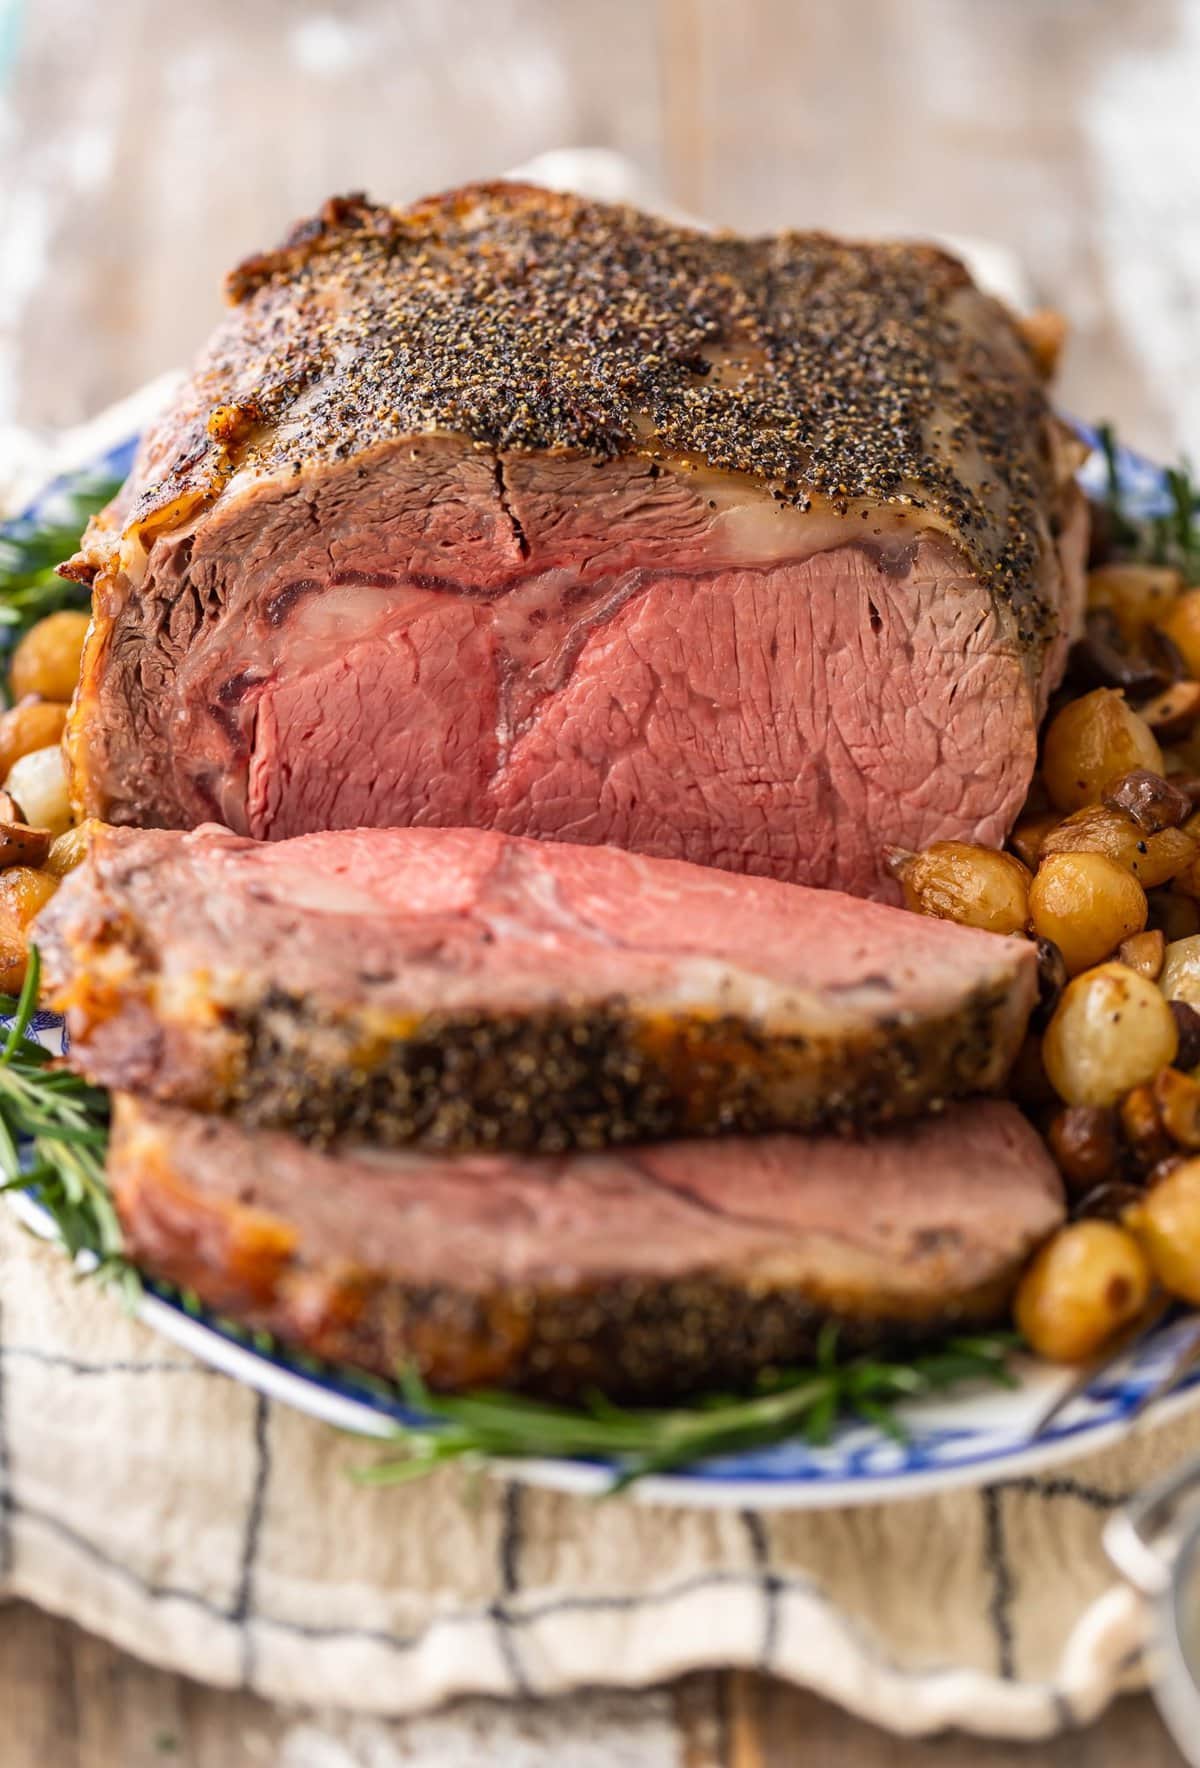 prime rib roast on a serving platter with potatoes, with a slice cut away. viewed from the front to reveal a red-pink medium-rare interior.